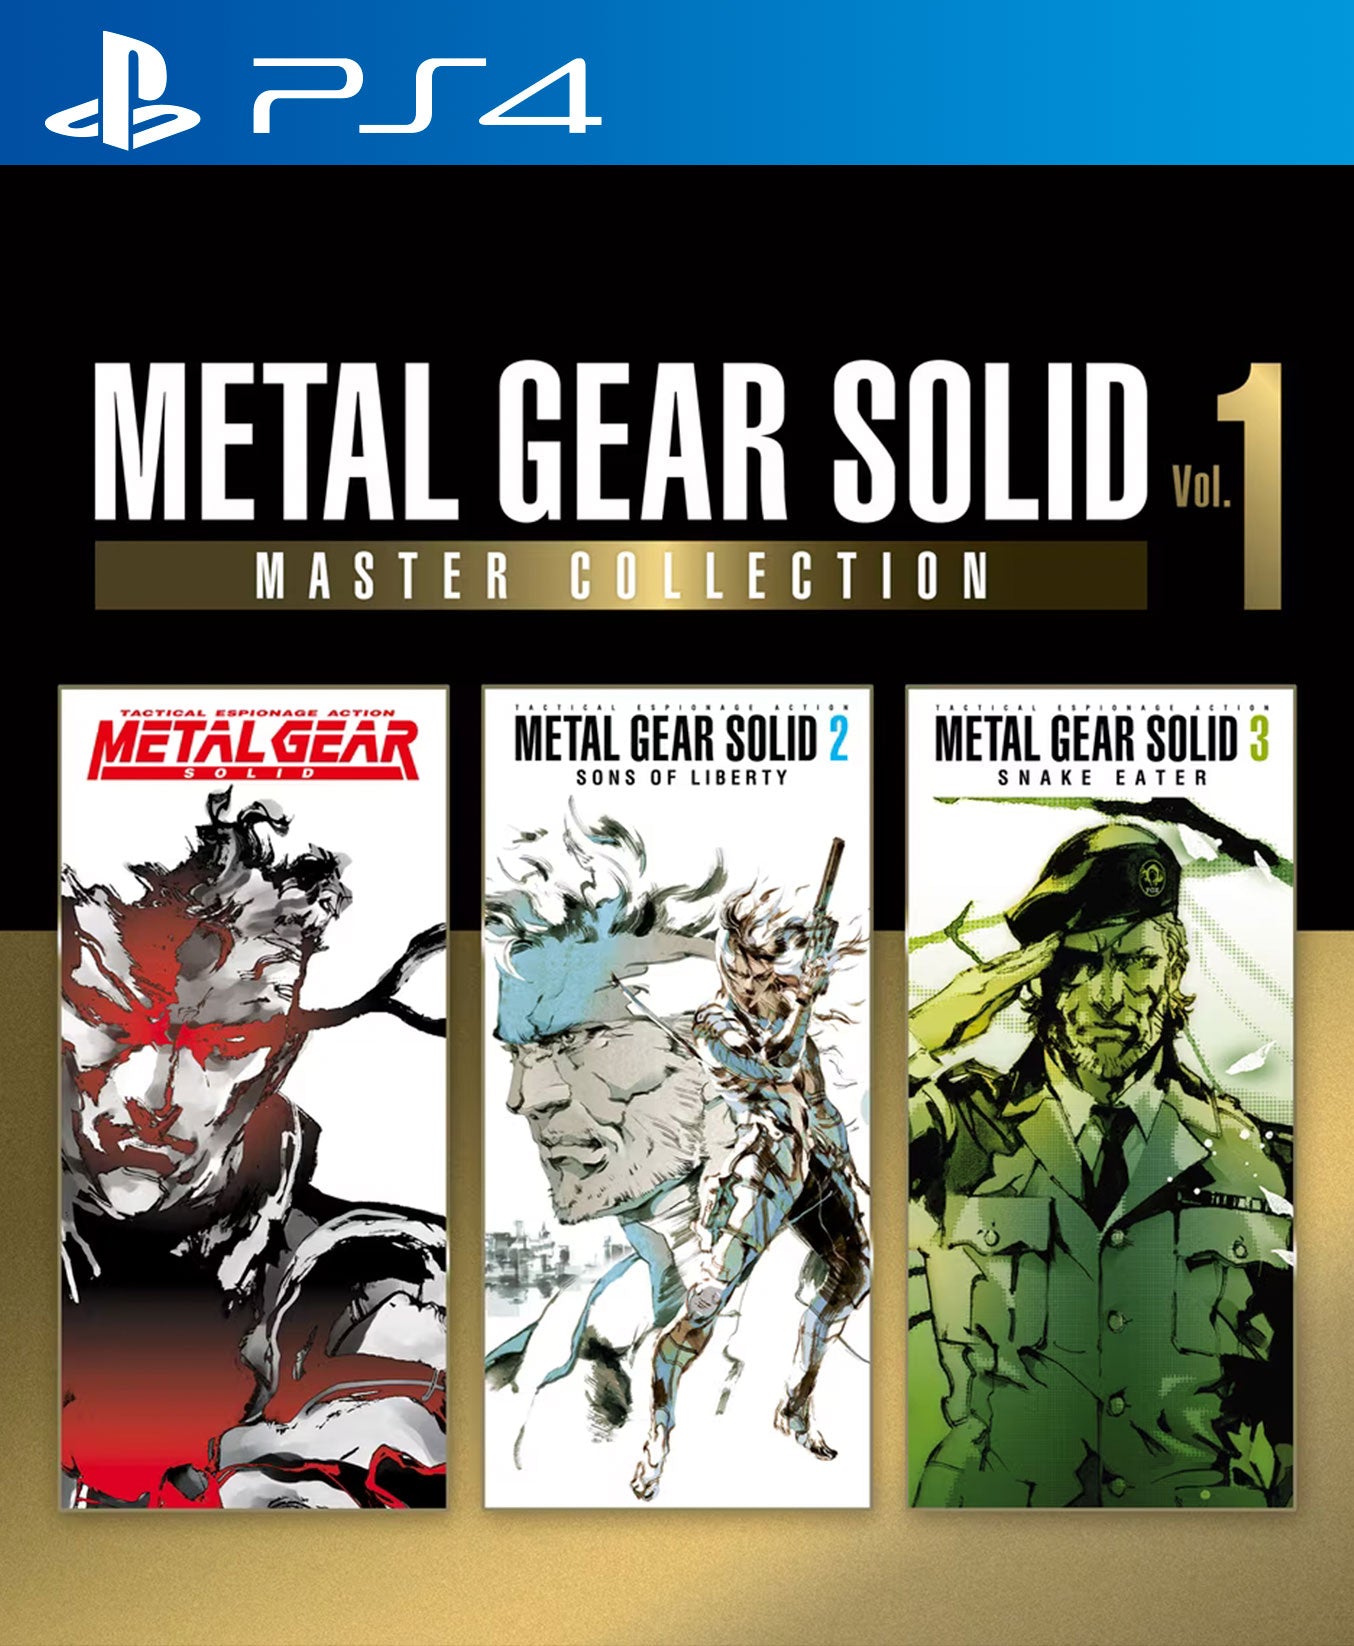 Metal Gear Solid: Master Collection Vol 1 PS4